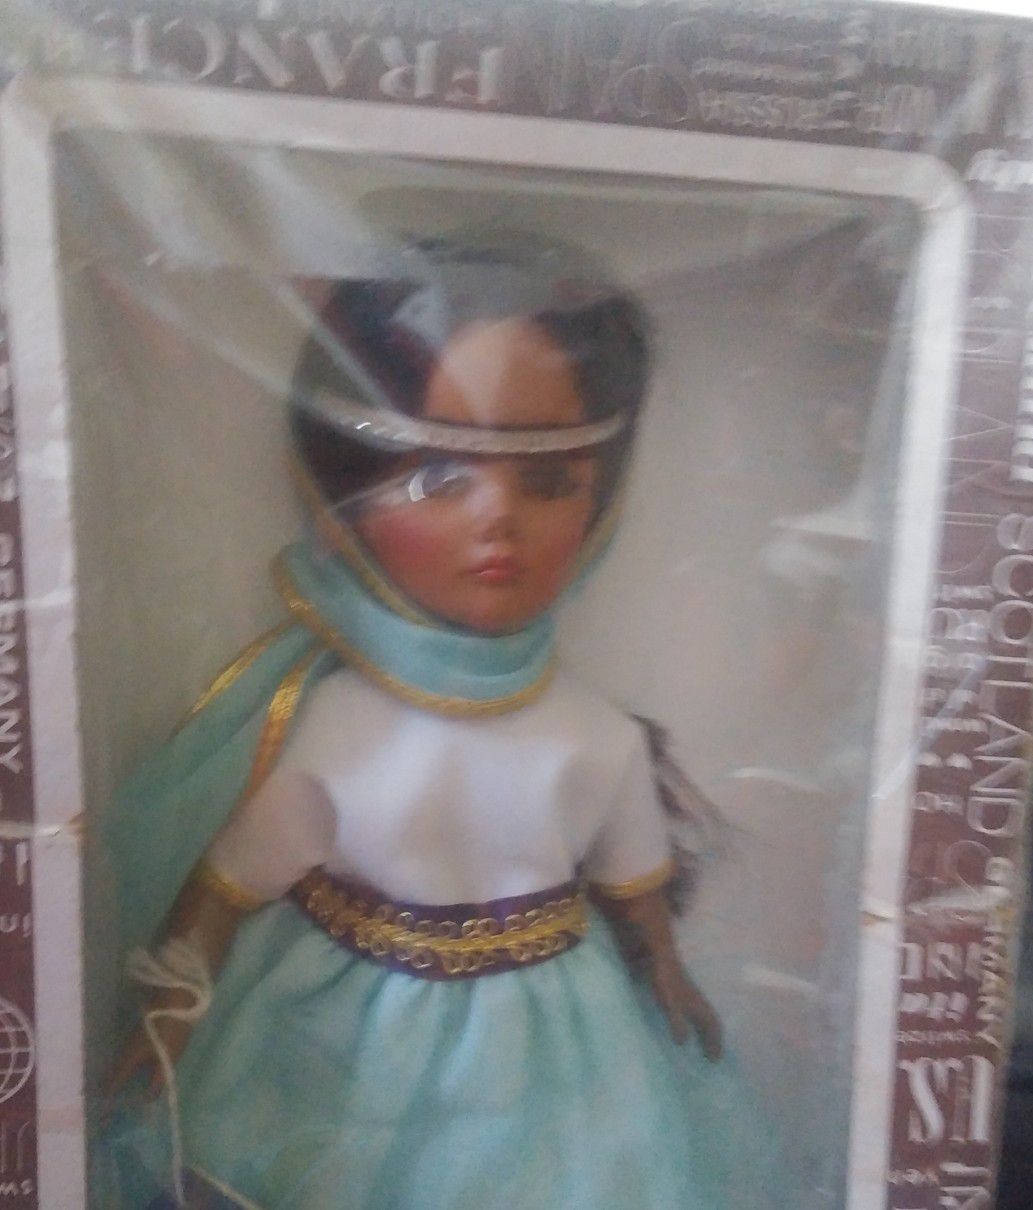 Antique Indian doll